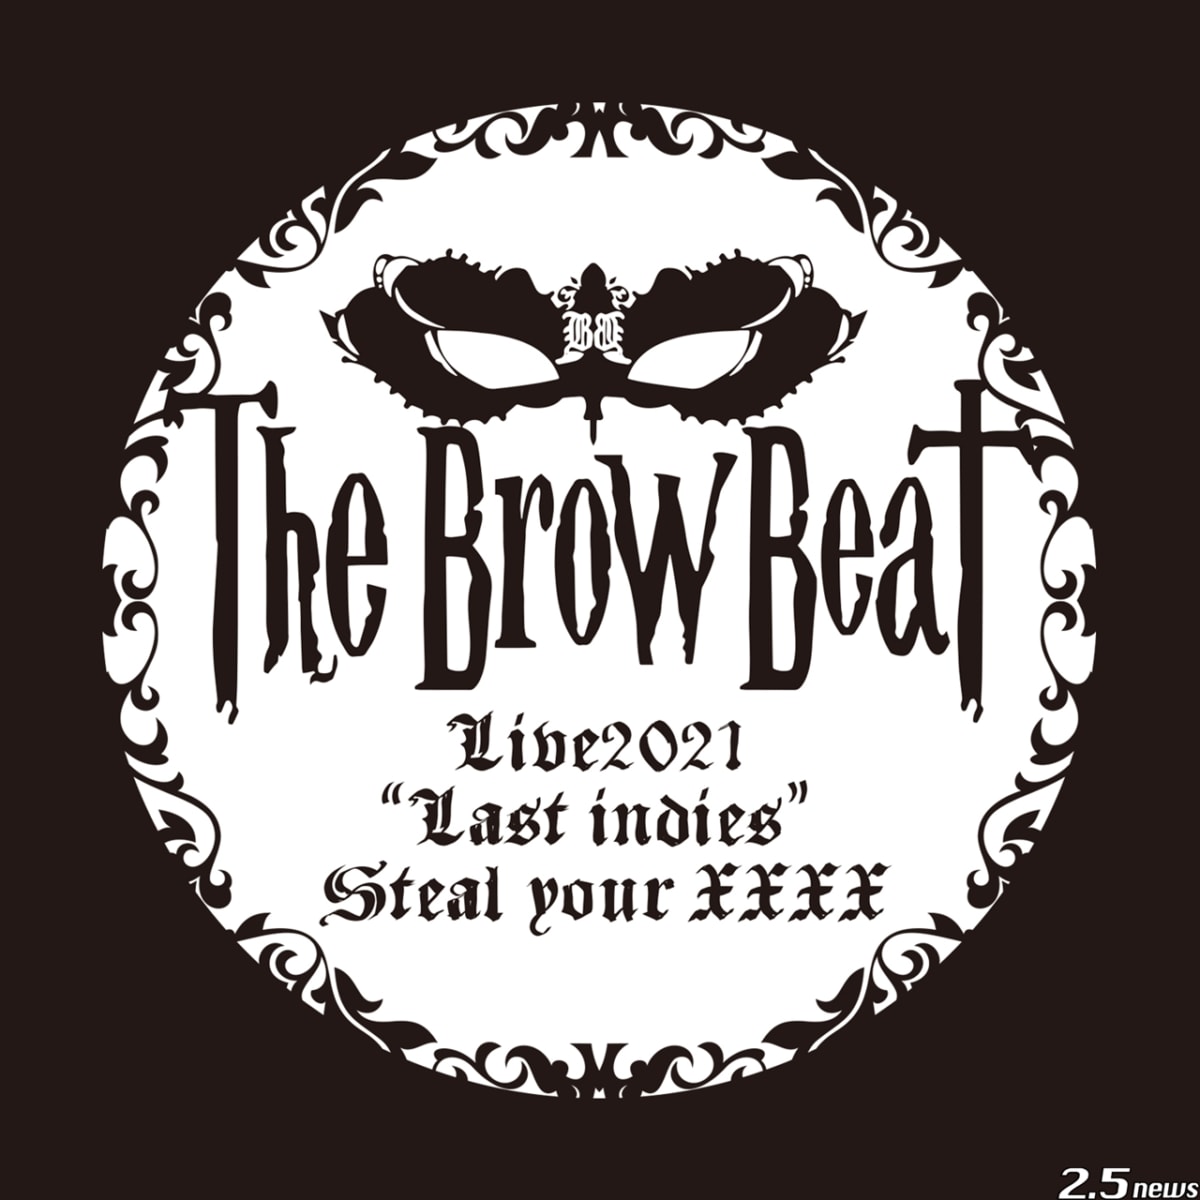 The Brow Beat 「The Brow Beat Live2021 “Last indies”〜Steal your xxxx〜 」